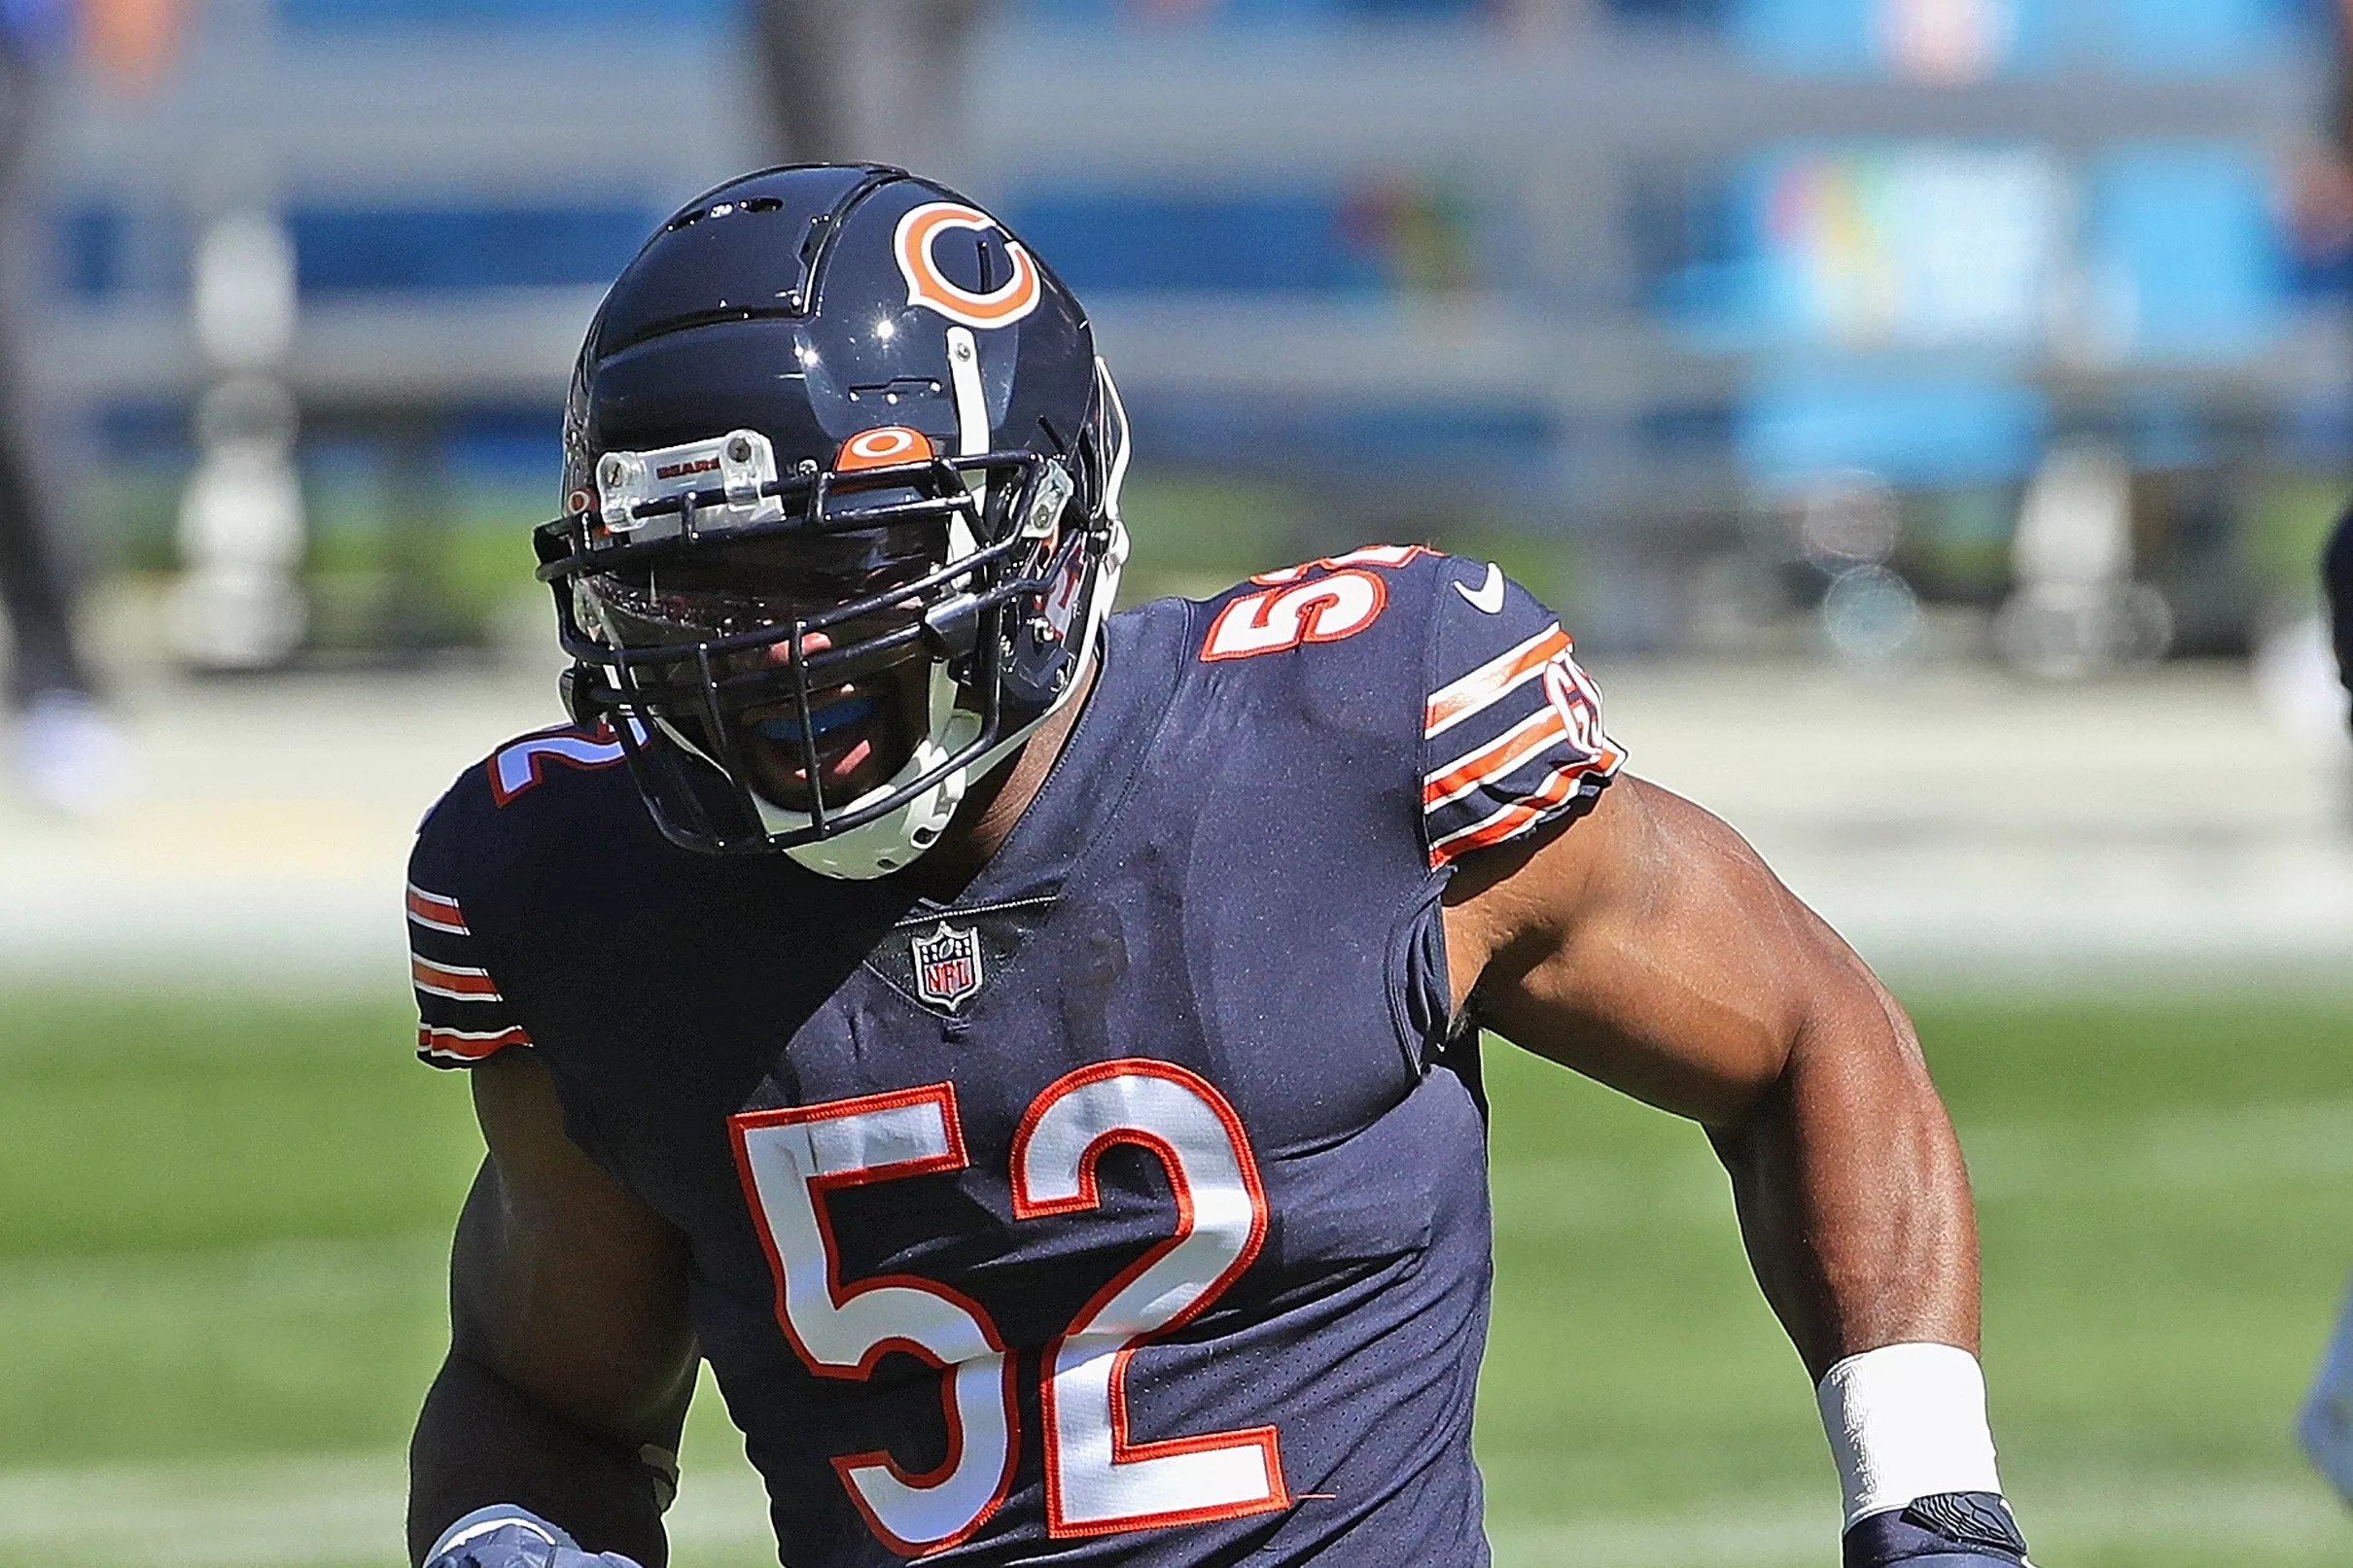 Khalil Mack is the Bears nominee for the 2020 Art Rooney Sportsmanship